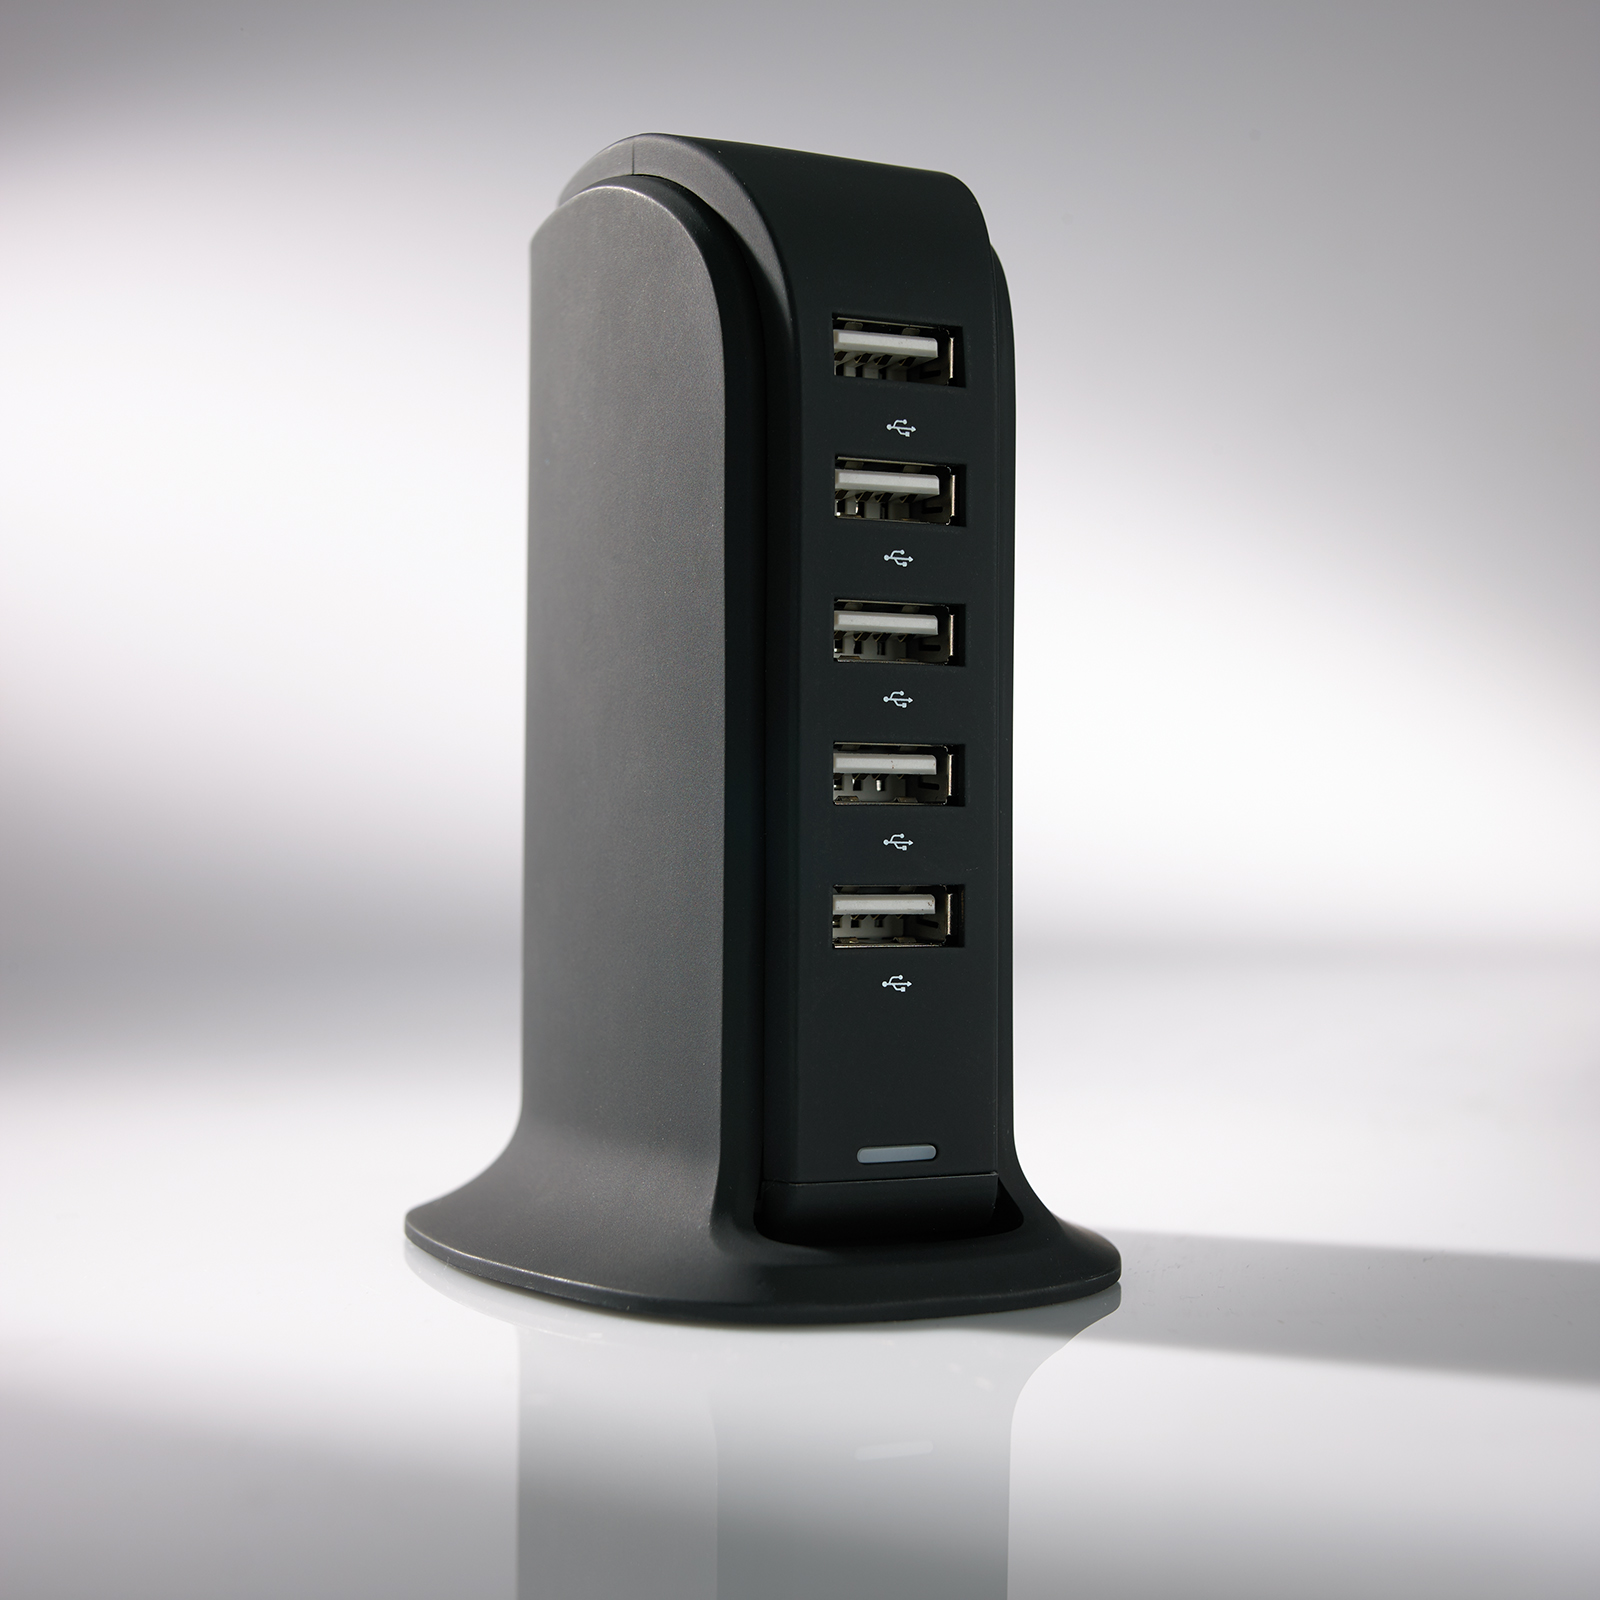 Printed 5 USB CHARGER TOWER PAINTURISSIMO